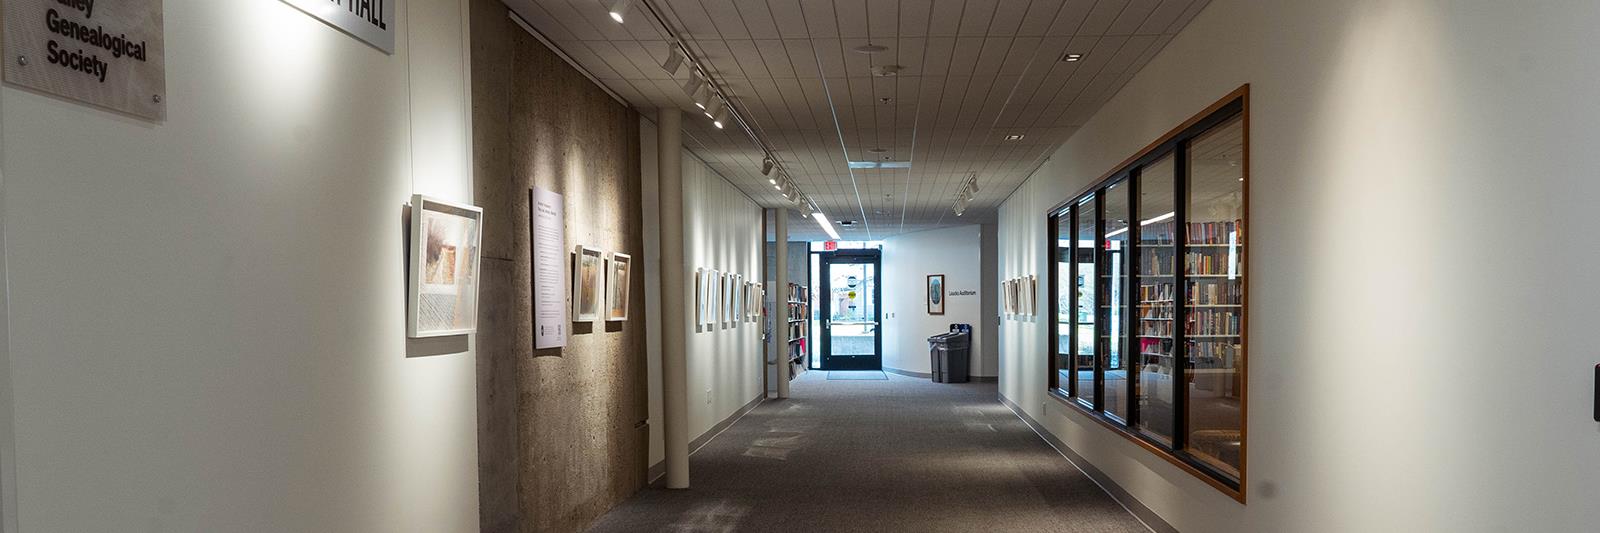 Hallway in Salem City Library with framed art on both walls.